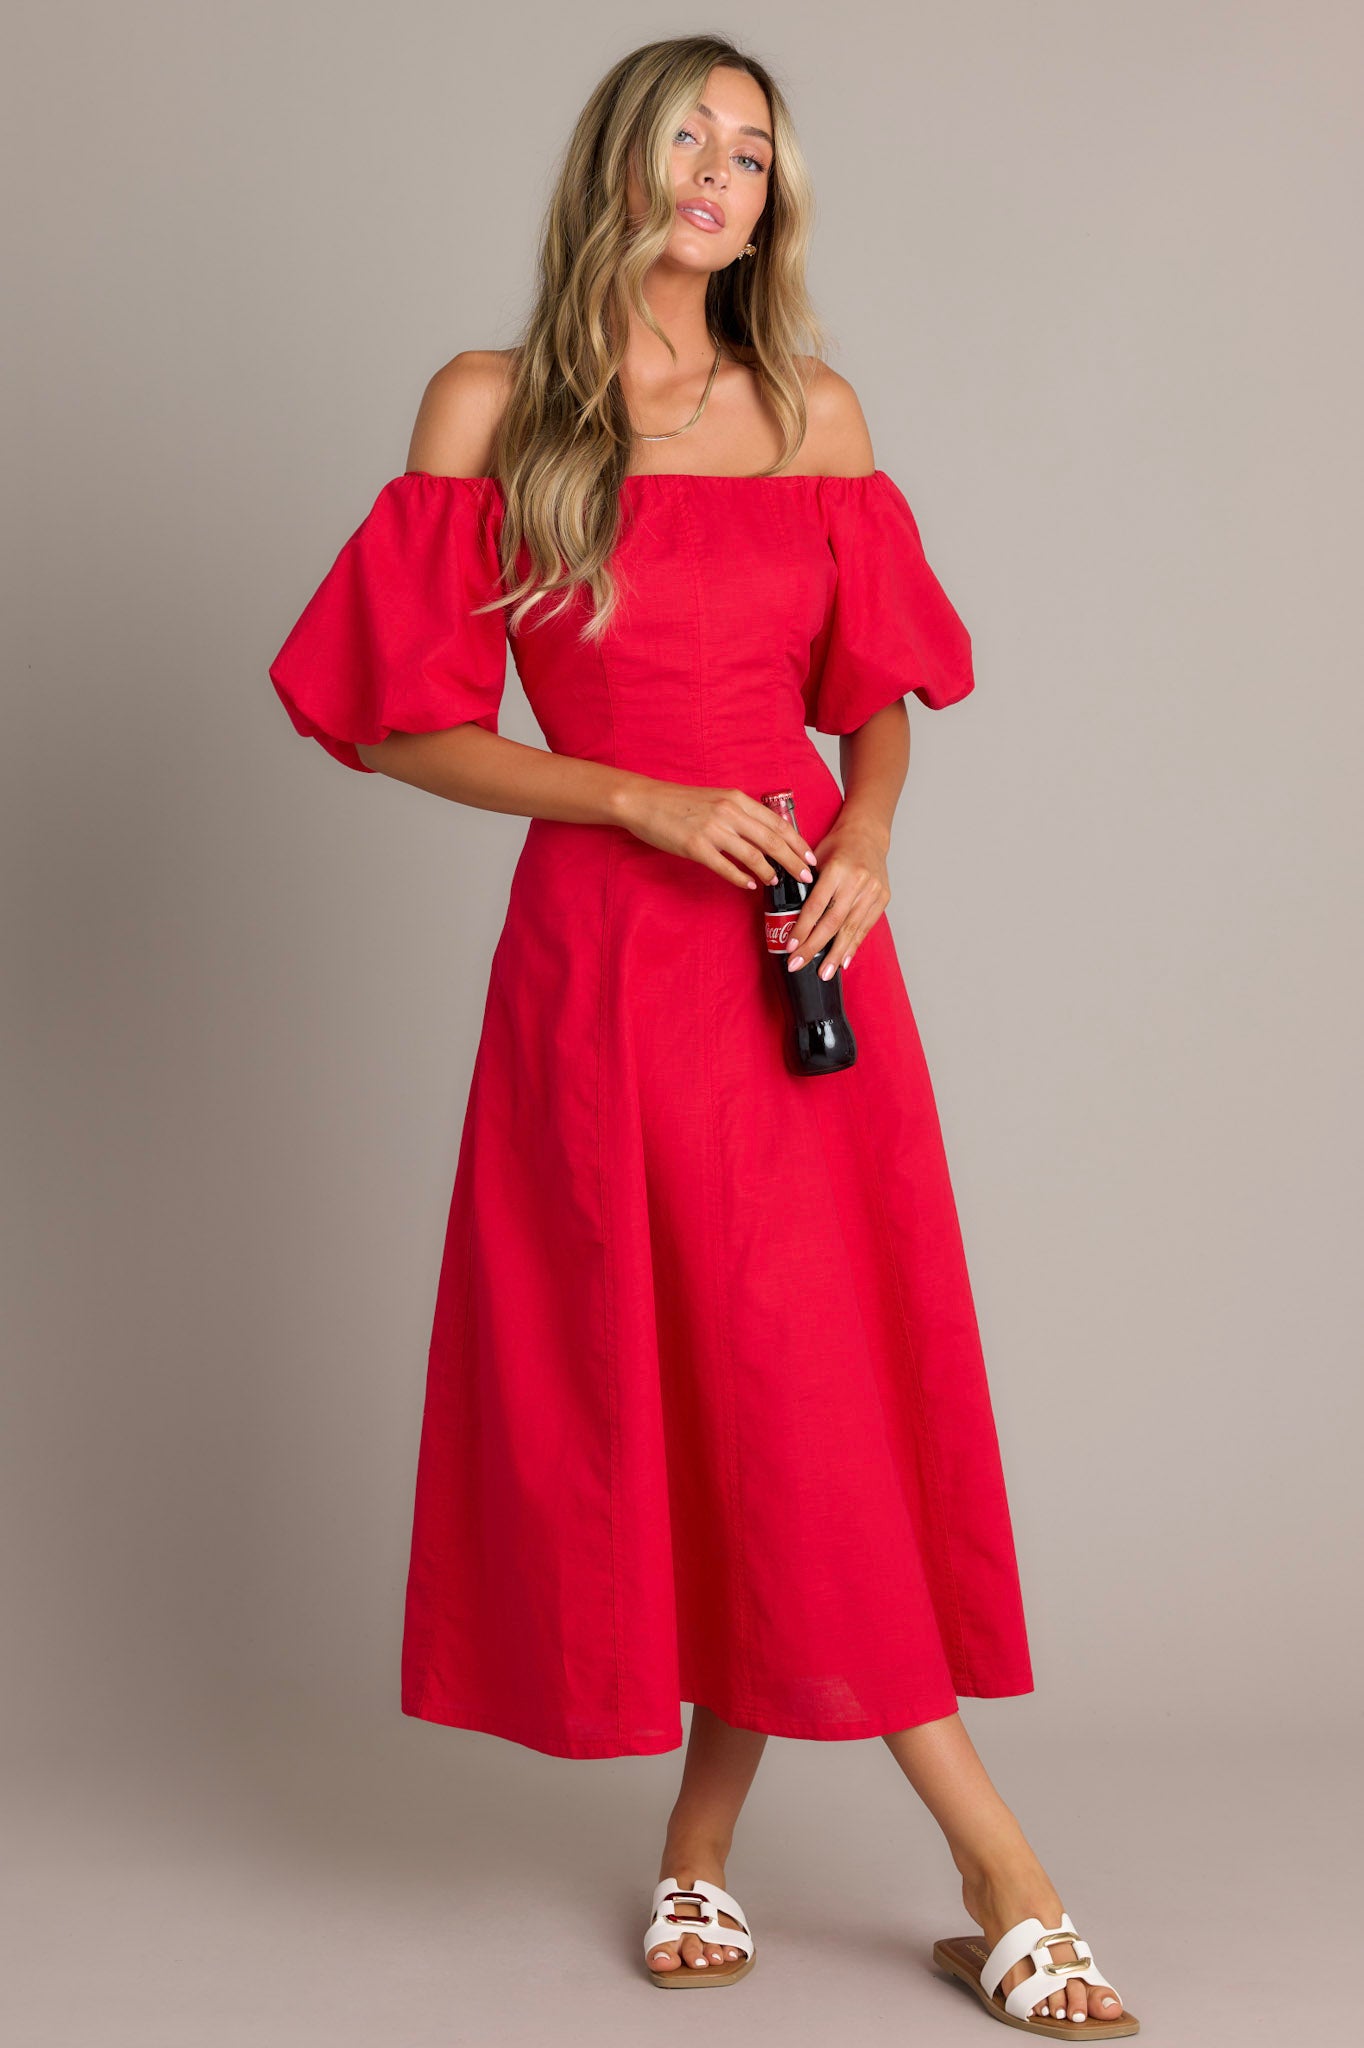 This red midi dress features an off shoulder elastic neckline, a discrete back zipper, functional hip pockets, visible front and back seams, elastic cuffed puff half sleeves, and a flowing silhouette.